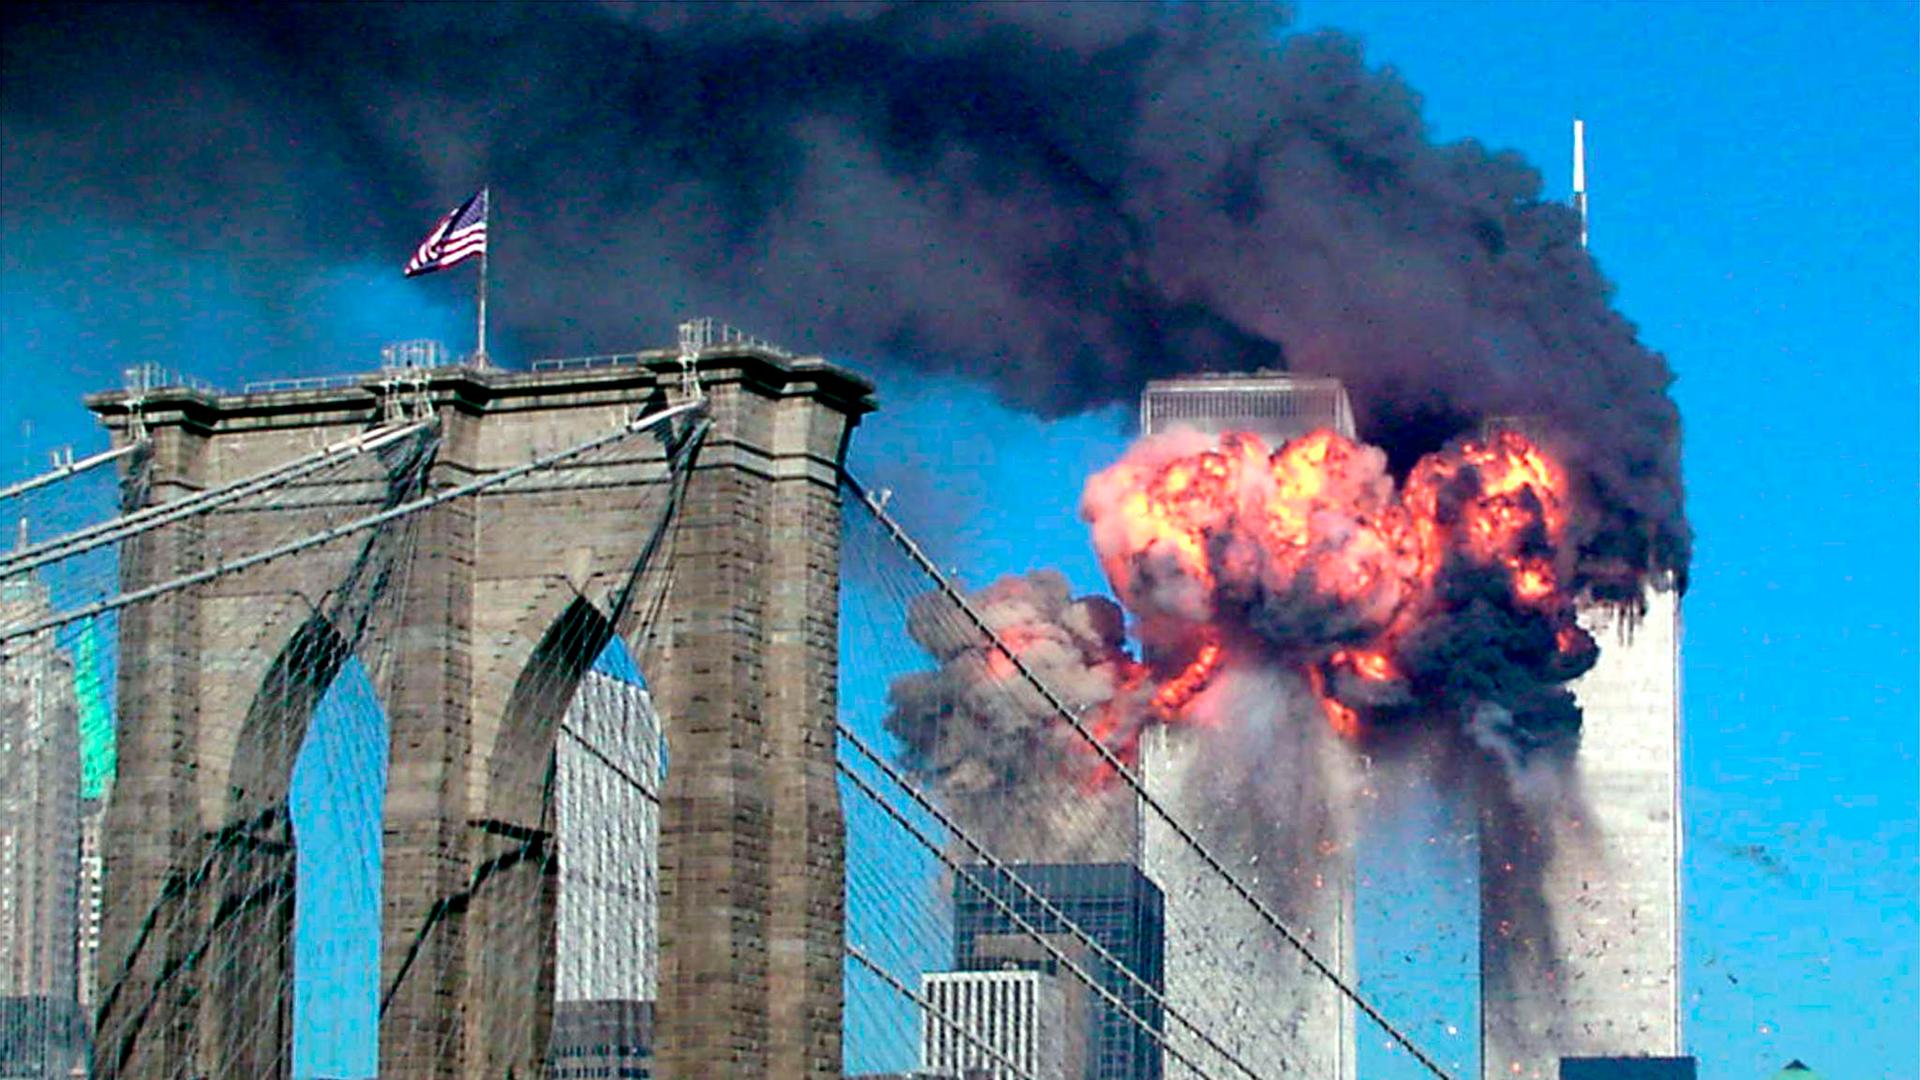 The second tower of the World Trade Center in New York City explodes into flames after being hit by a plane, hijacked by al-Qaeda, on September 11th 2001